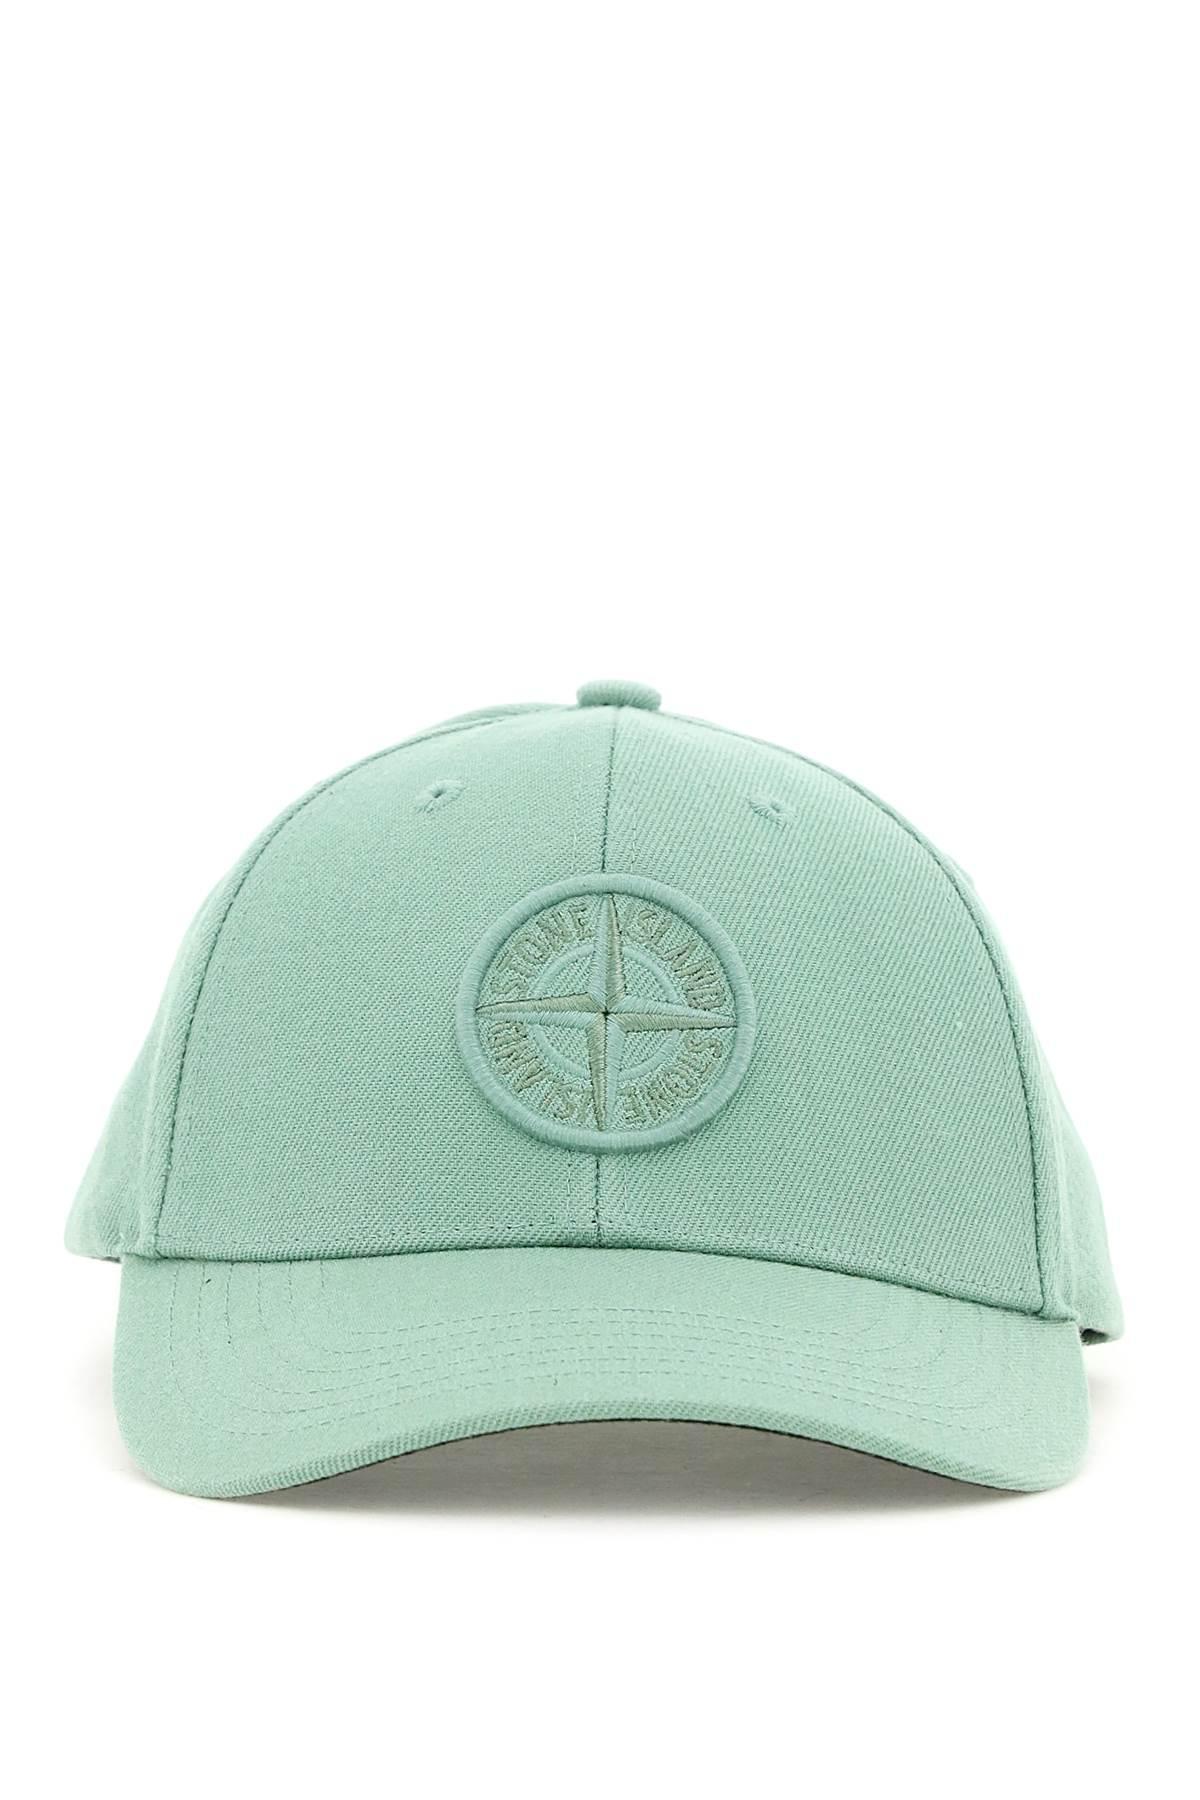 Stone Island Cotton Logoed Baseball Cap in Green for Men - Save 3% | Lyst